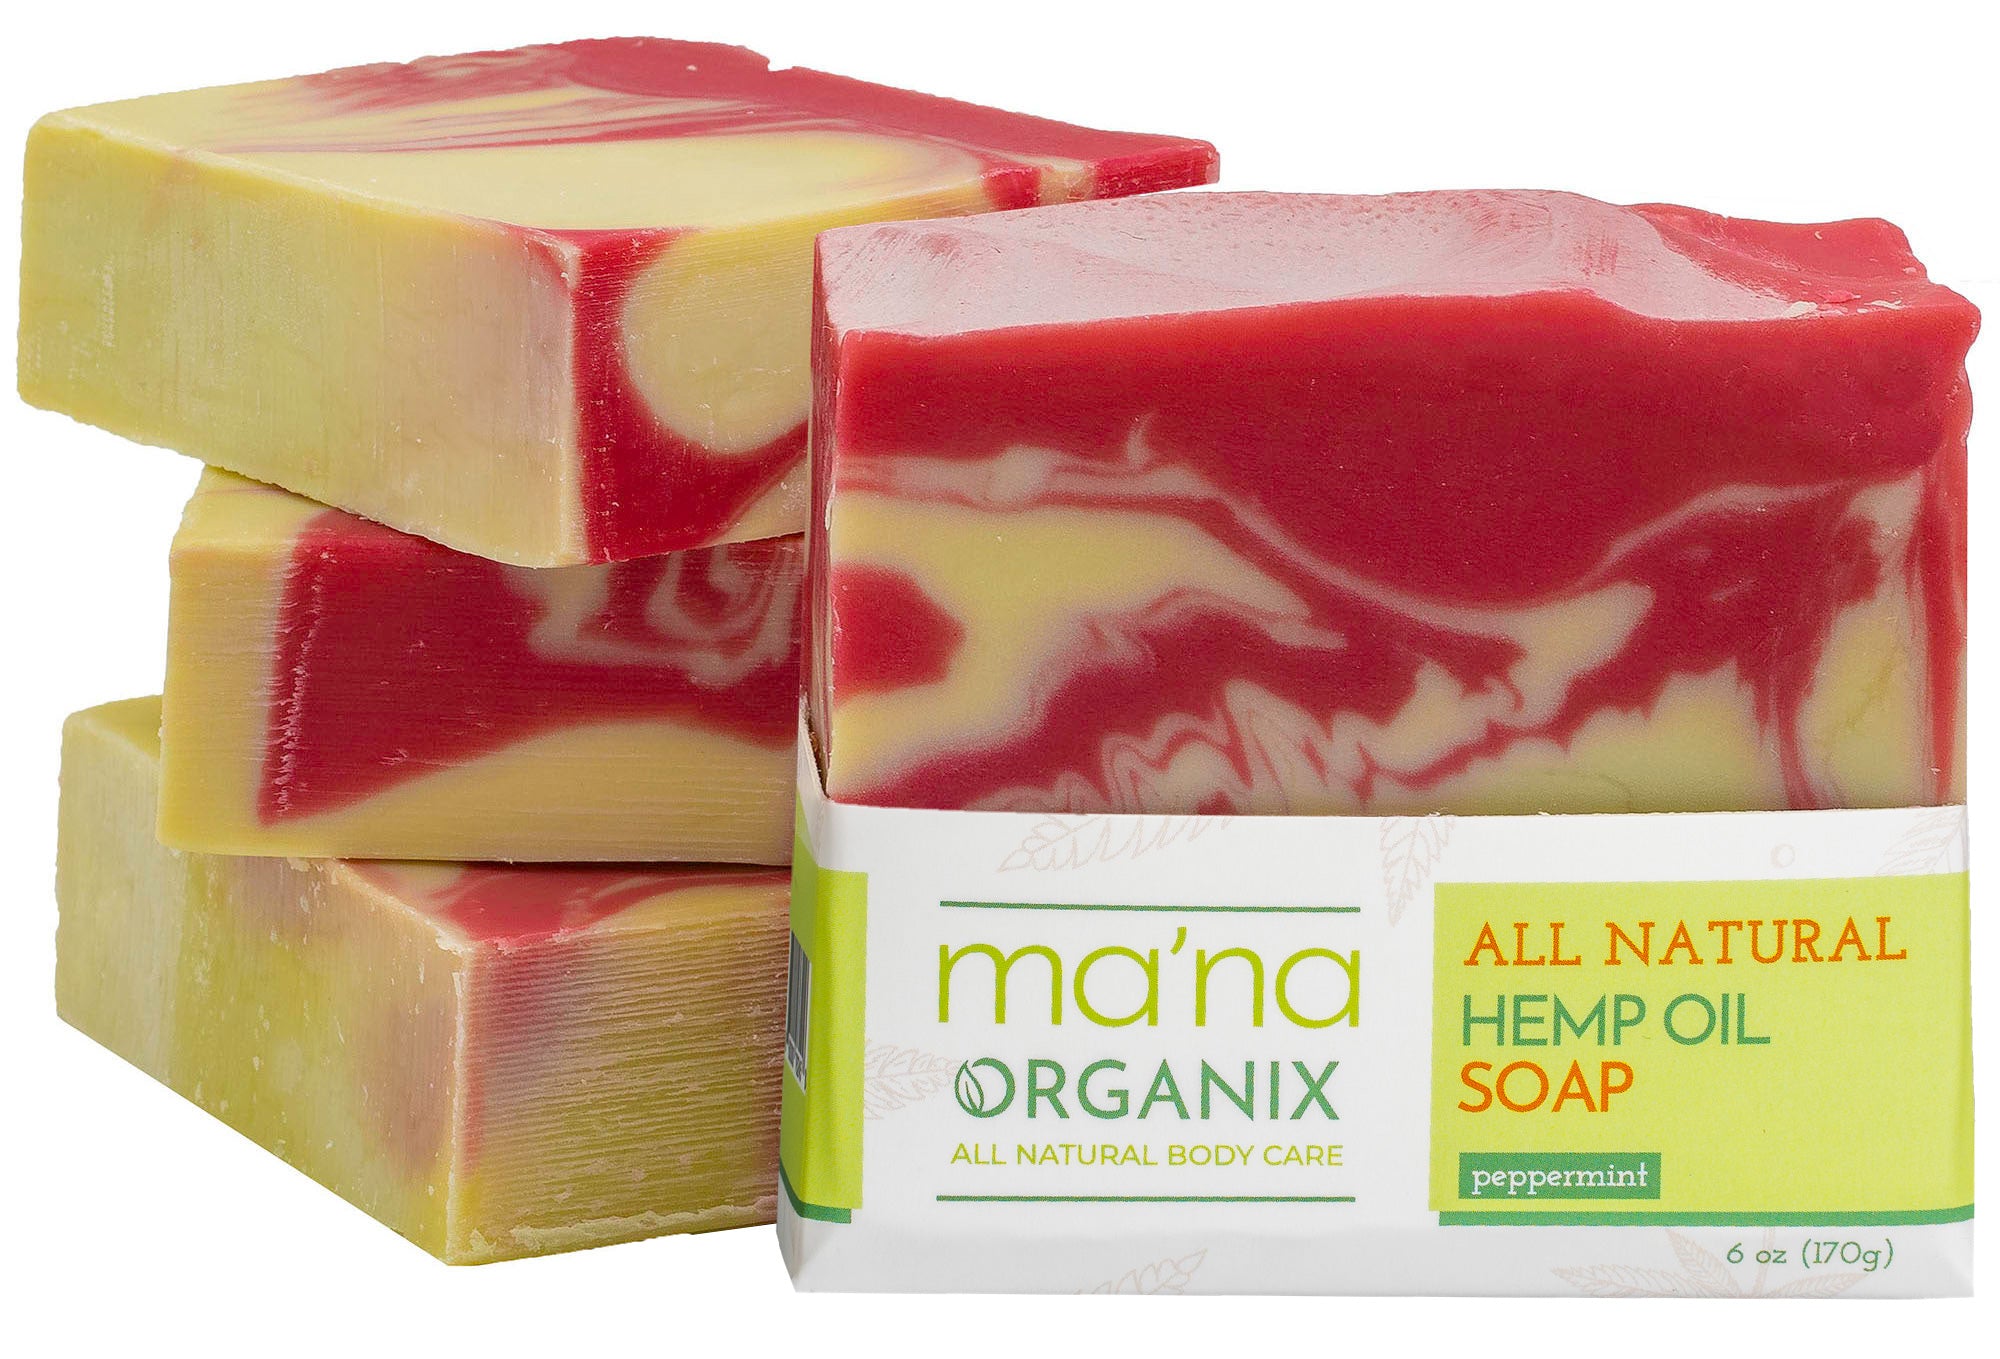 All Natural Hemp Oil & Peppermint Soap Bar with Ecofriendly and Biodegradable Packaging (6 oz.)